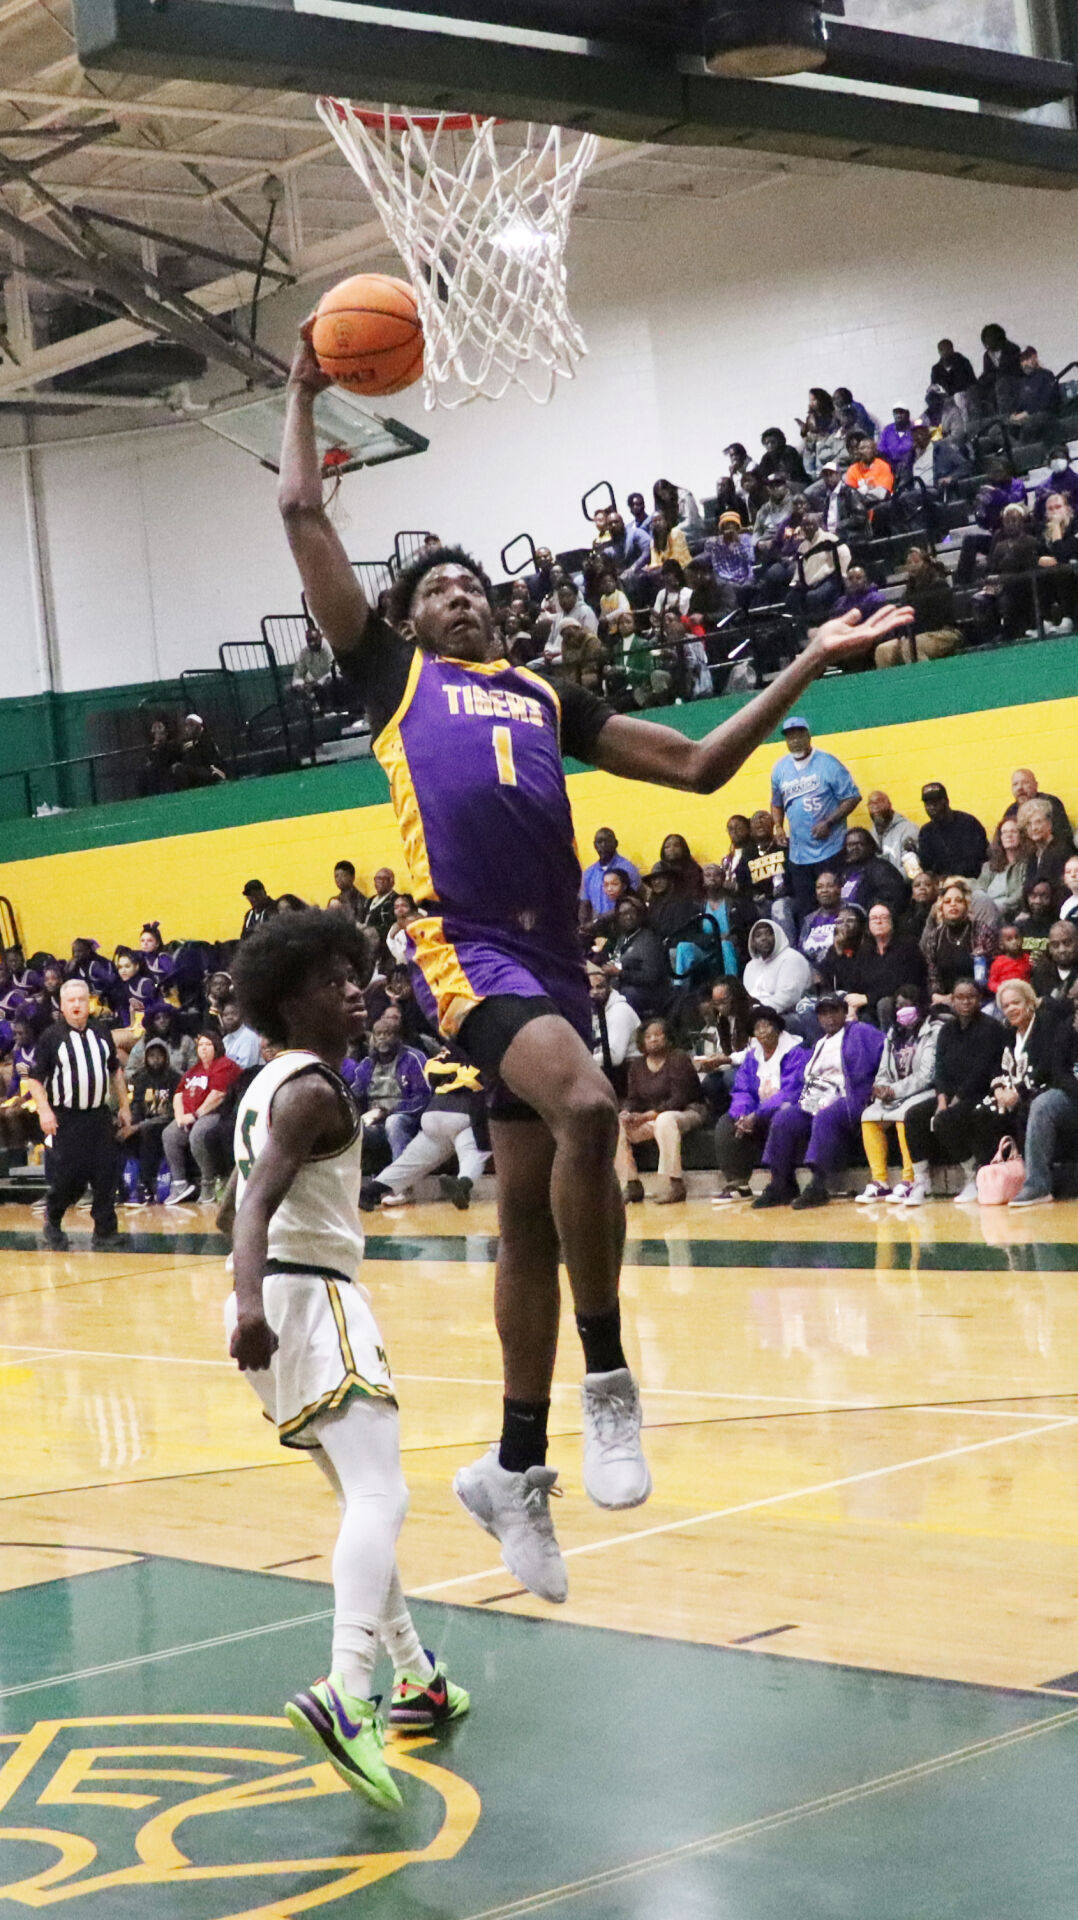 Tristan Thompson leads Wilson to victory in high school basketball game against Myrtle Beach